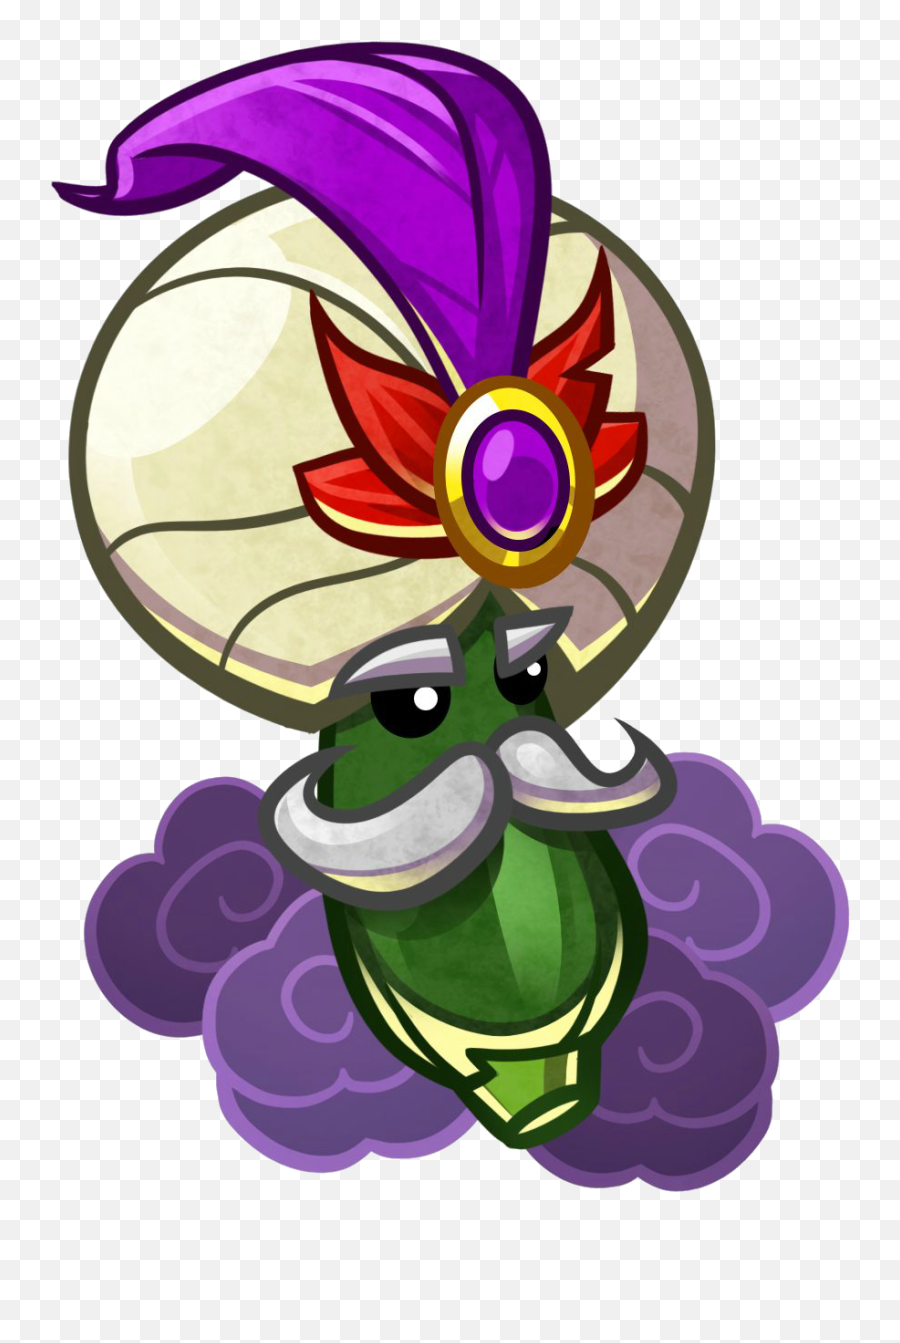 Plants Vs Zombies Heroes The Great Zucchini Full Size Png - Personaje Planta Vs Zombie Heroes,Zucchini Png